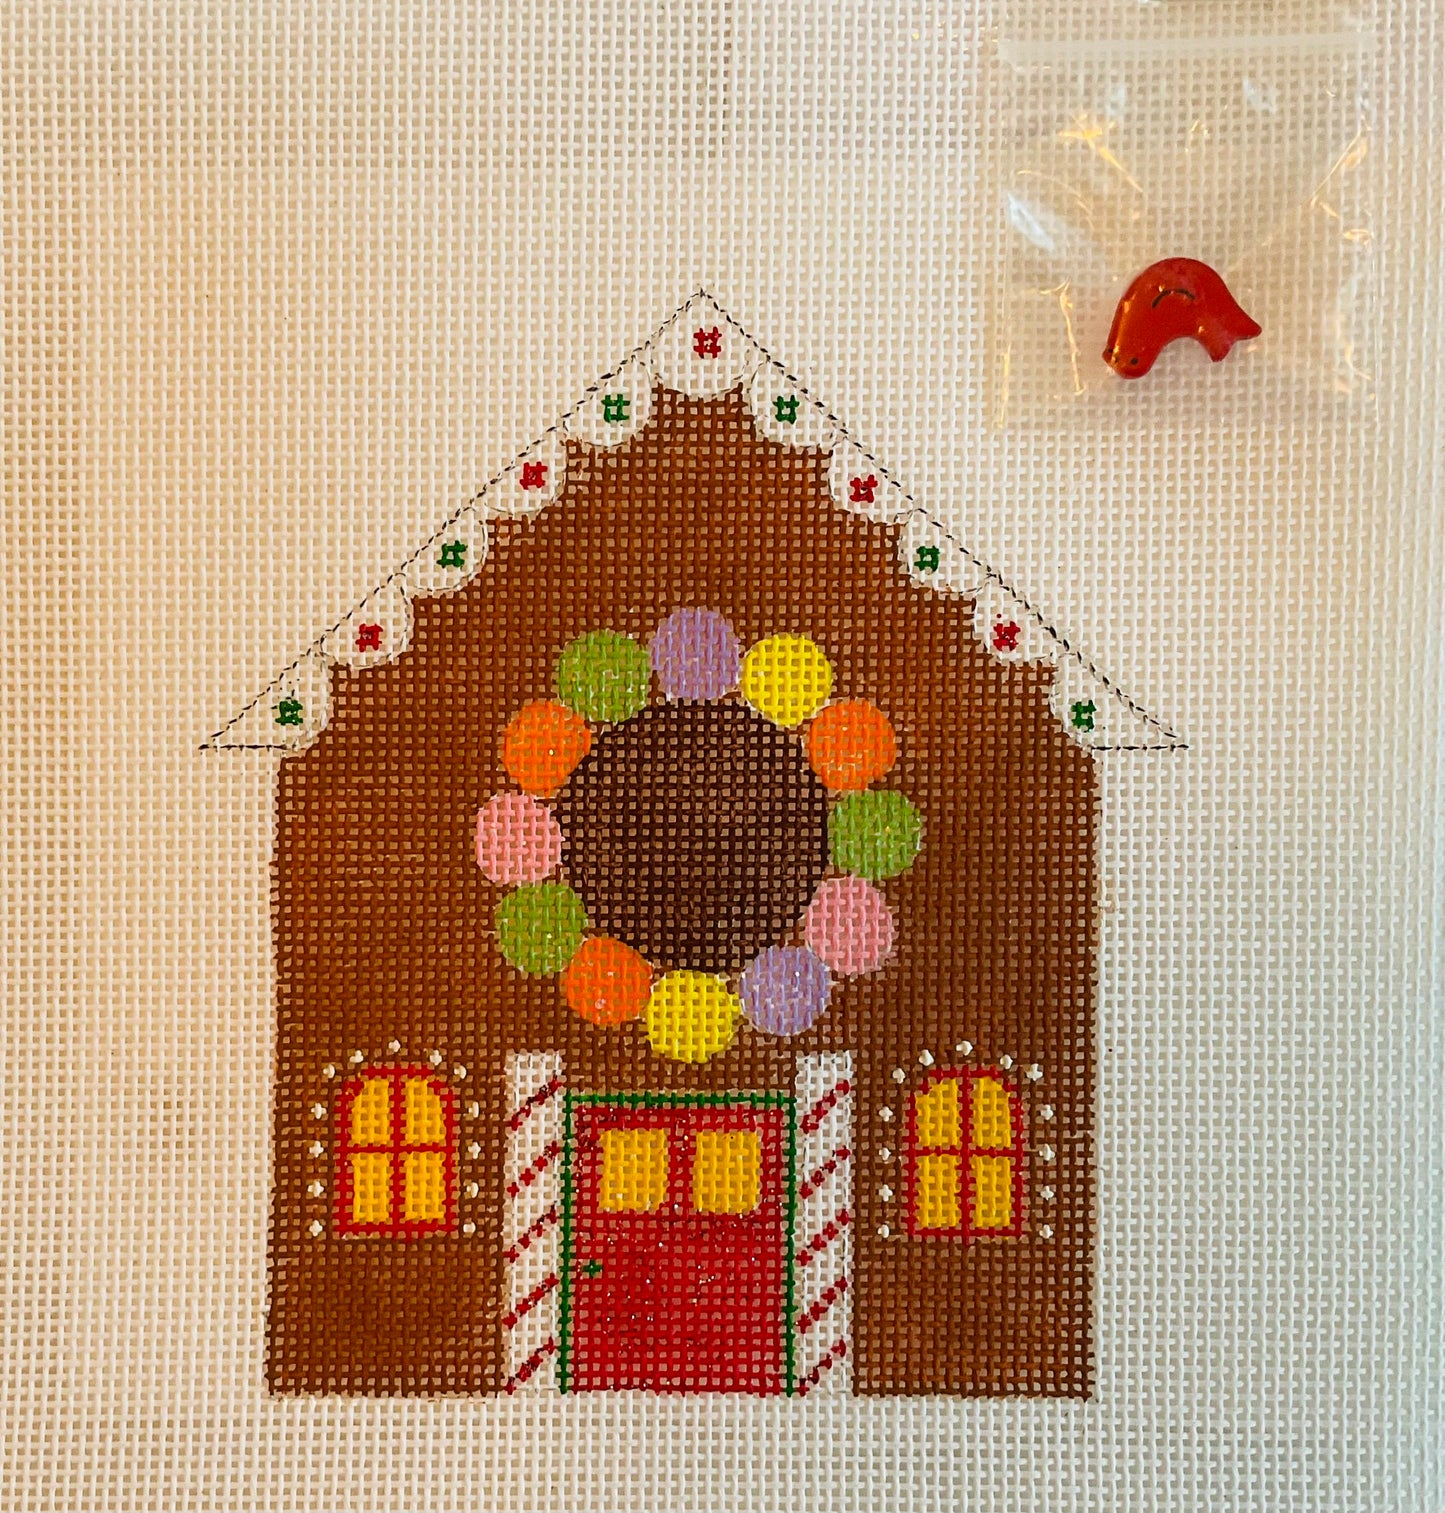 Gingerbread Birdhouse with Stitch Guide